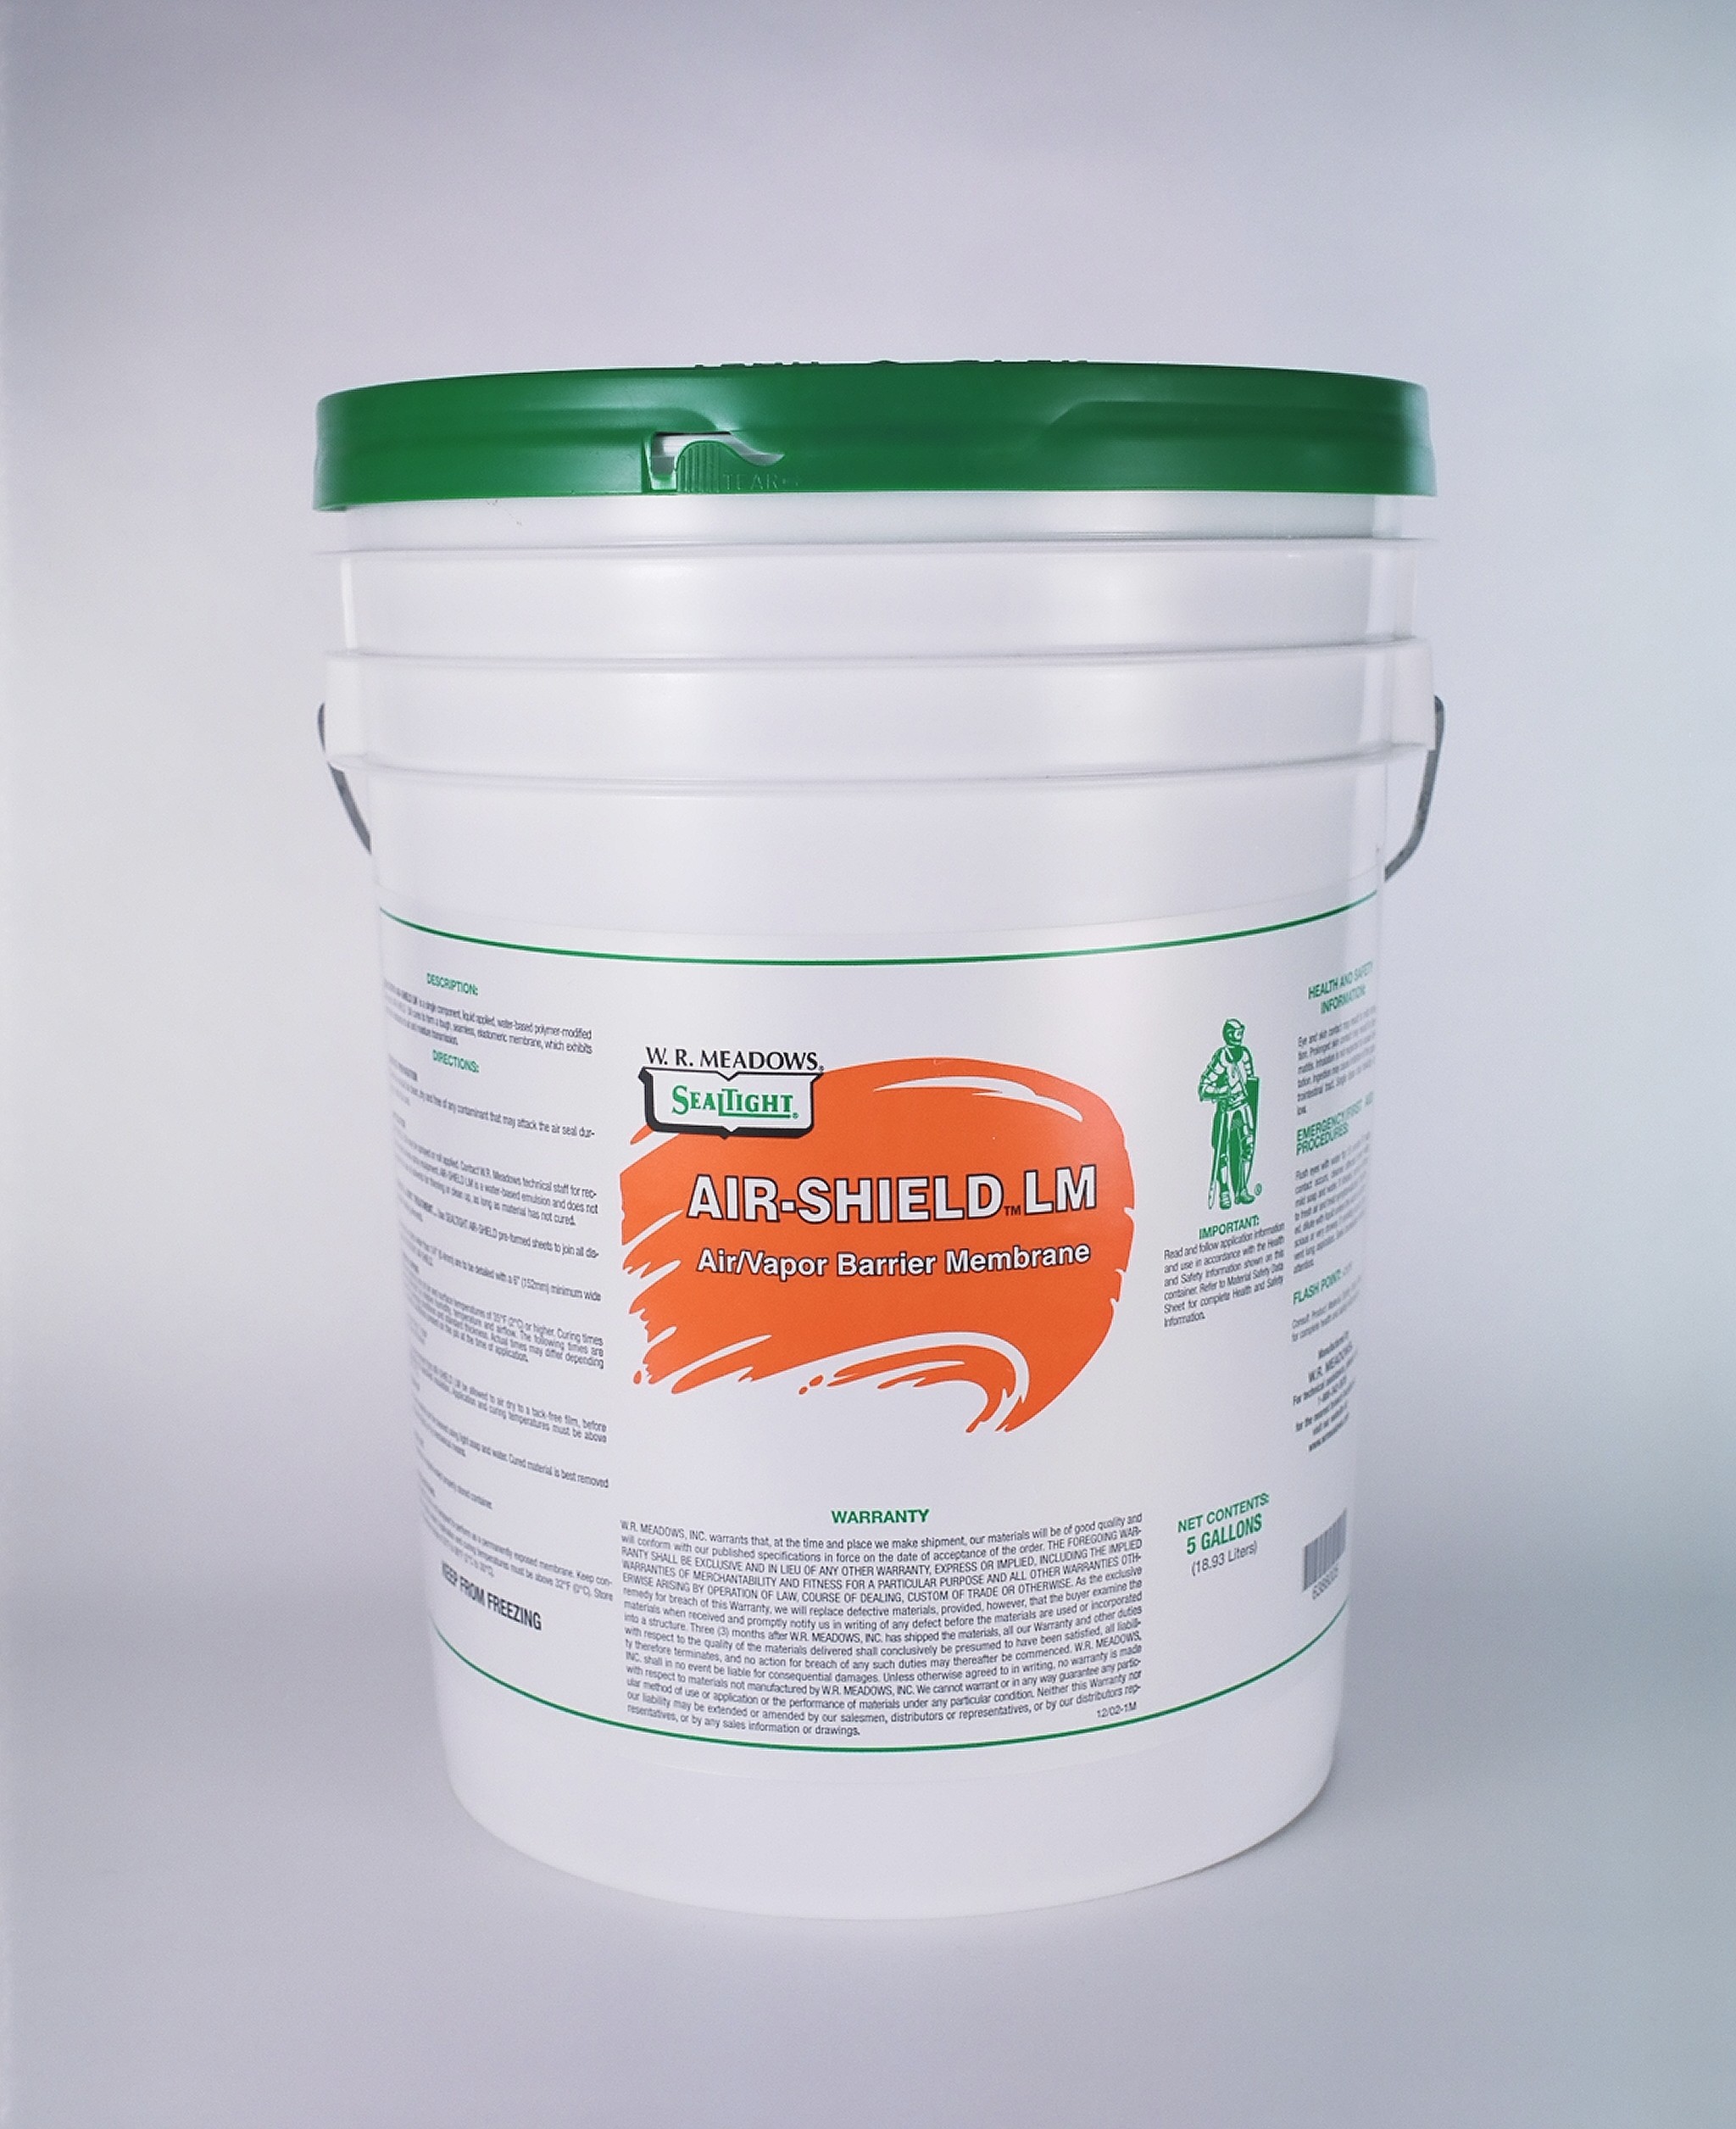 AIR-SHIELD LM by W. R. MEADOWS is a single-component, liquid-applied, water-based, polymer-modified air/vapor and liquid moisture barrier, formulated to prevent the transmission of air and inhibit vapor and moisture from passing through porous building materials.